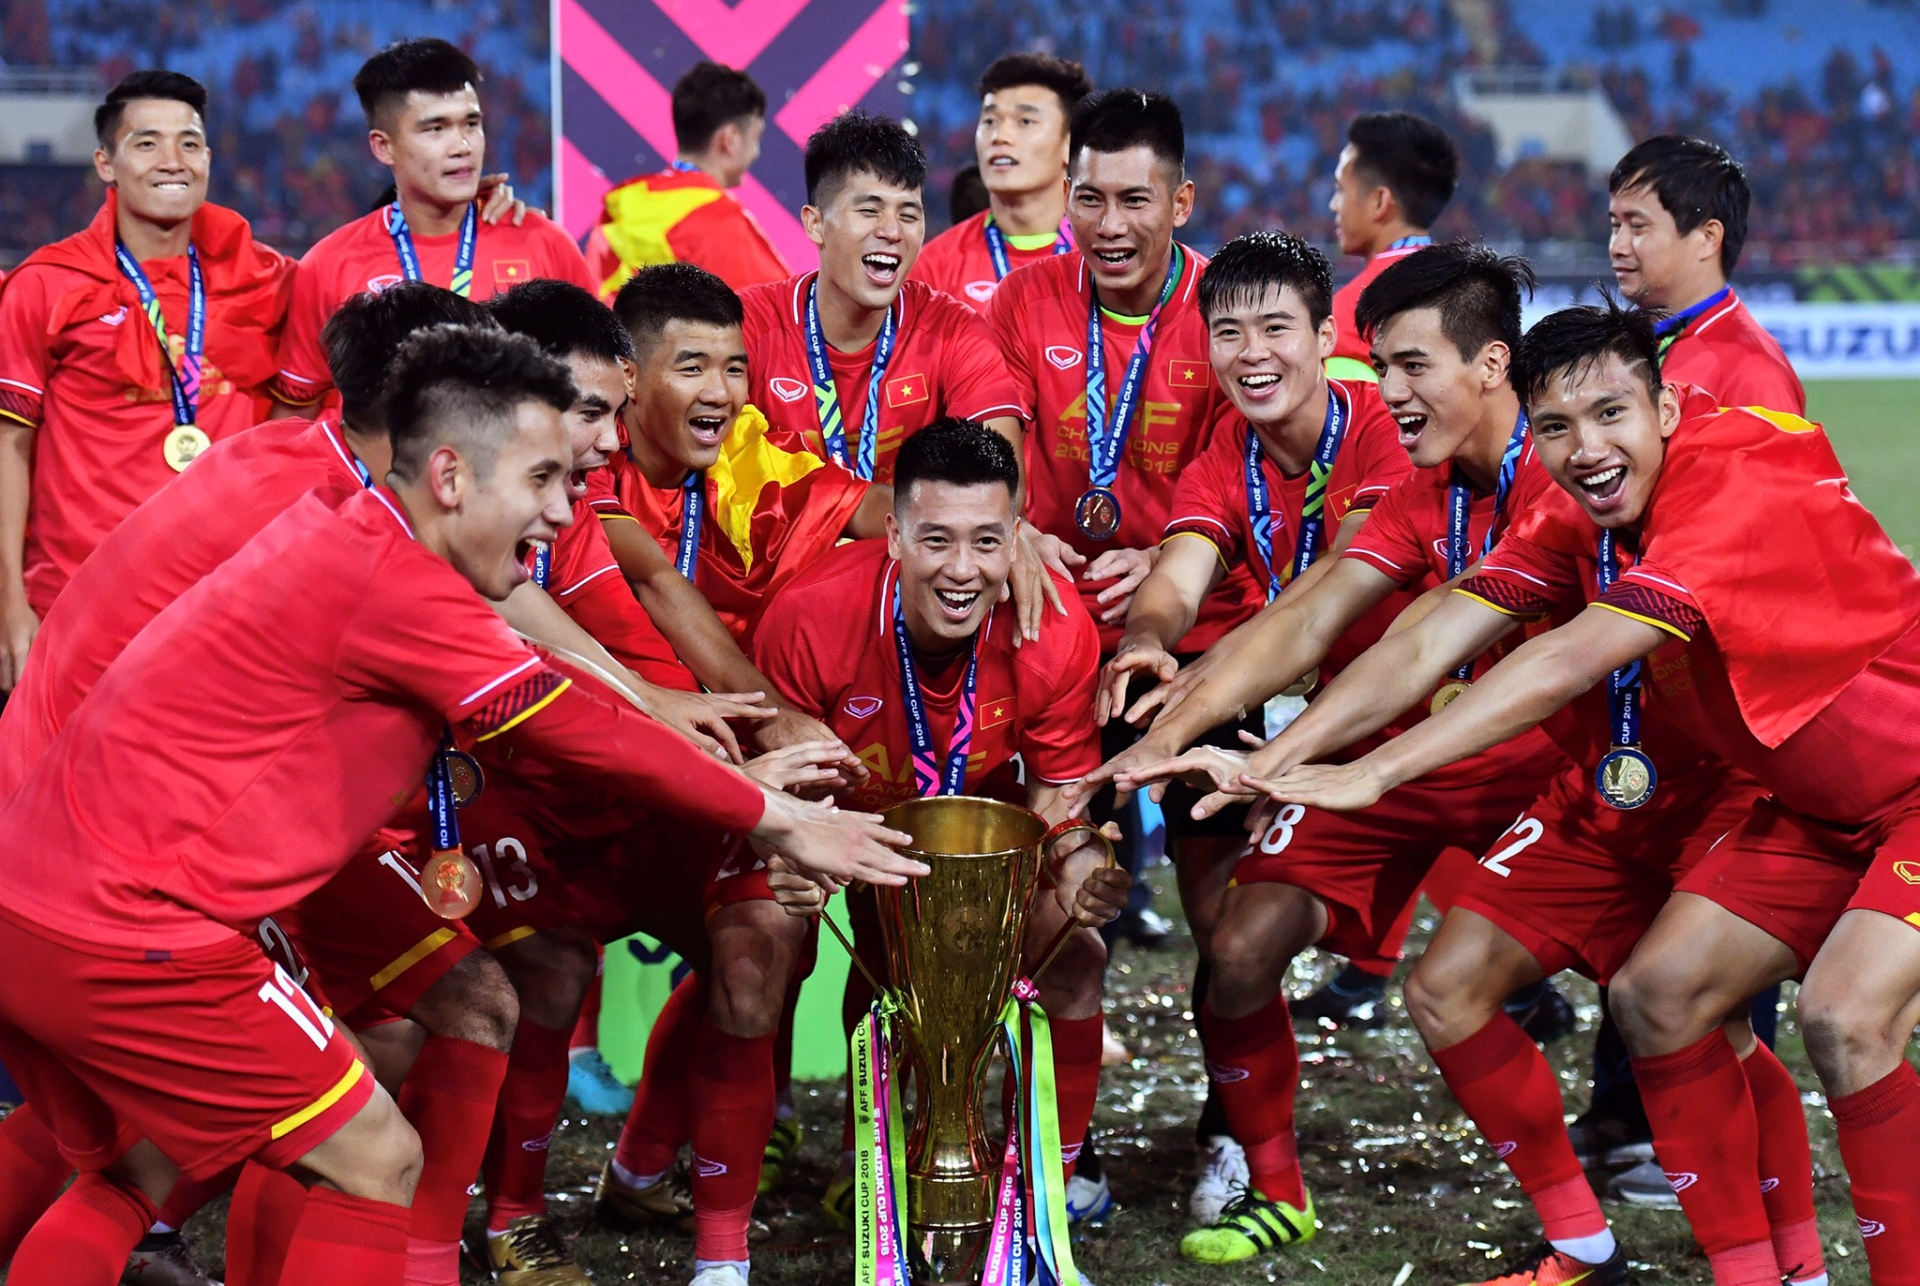 Vietnam is currently the reigning champion of the AFF Cup